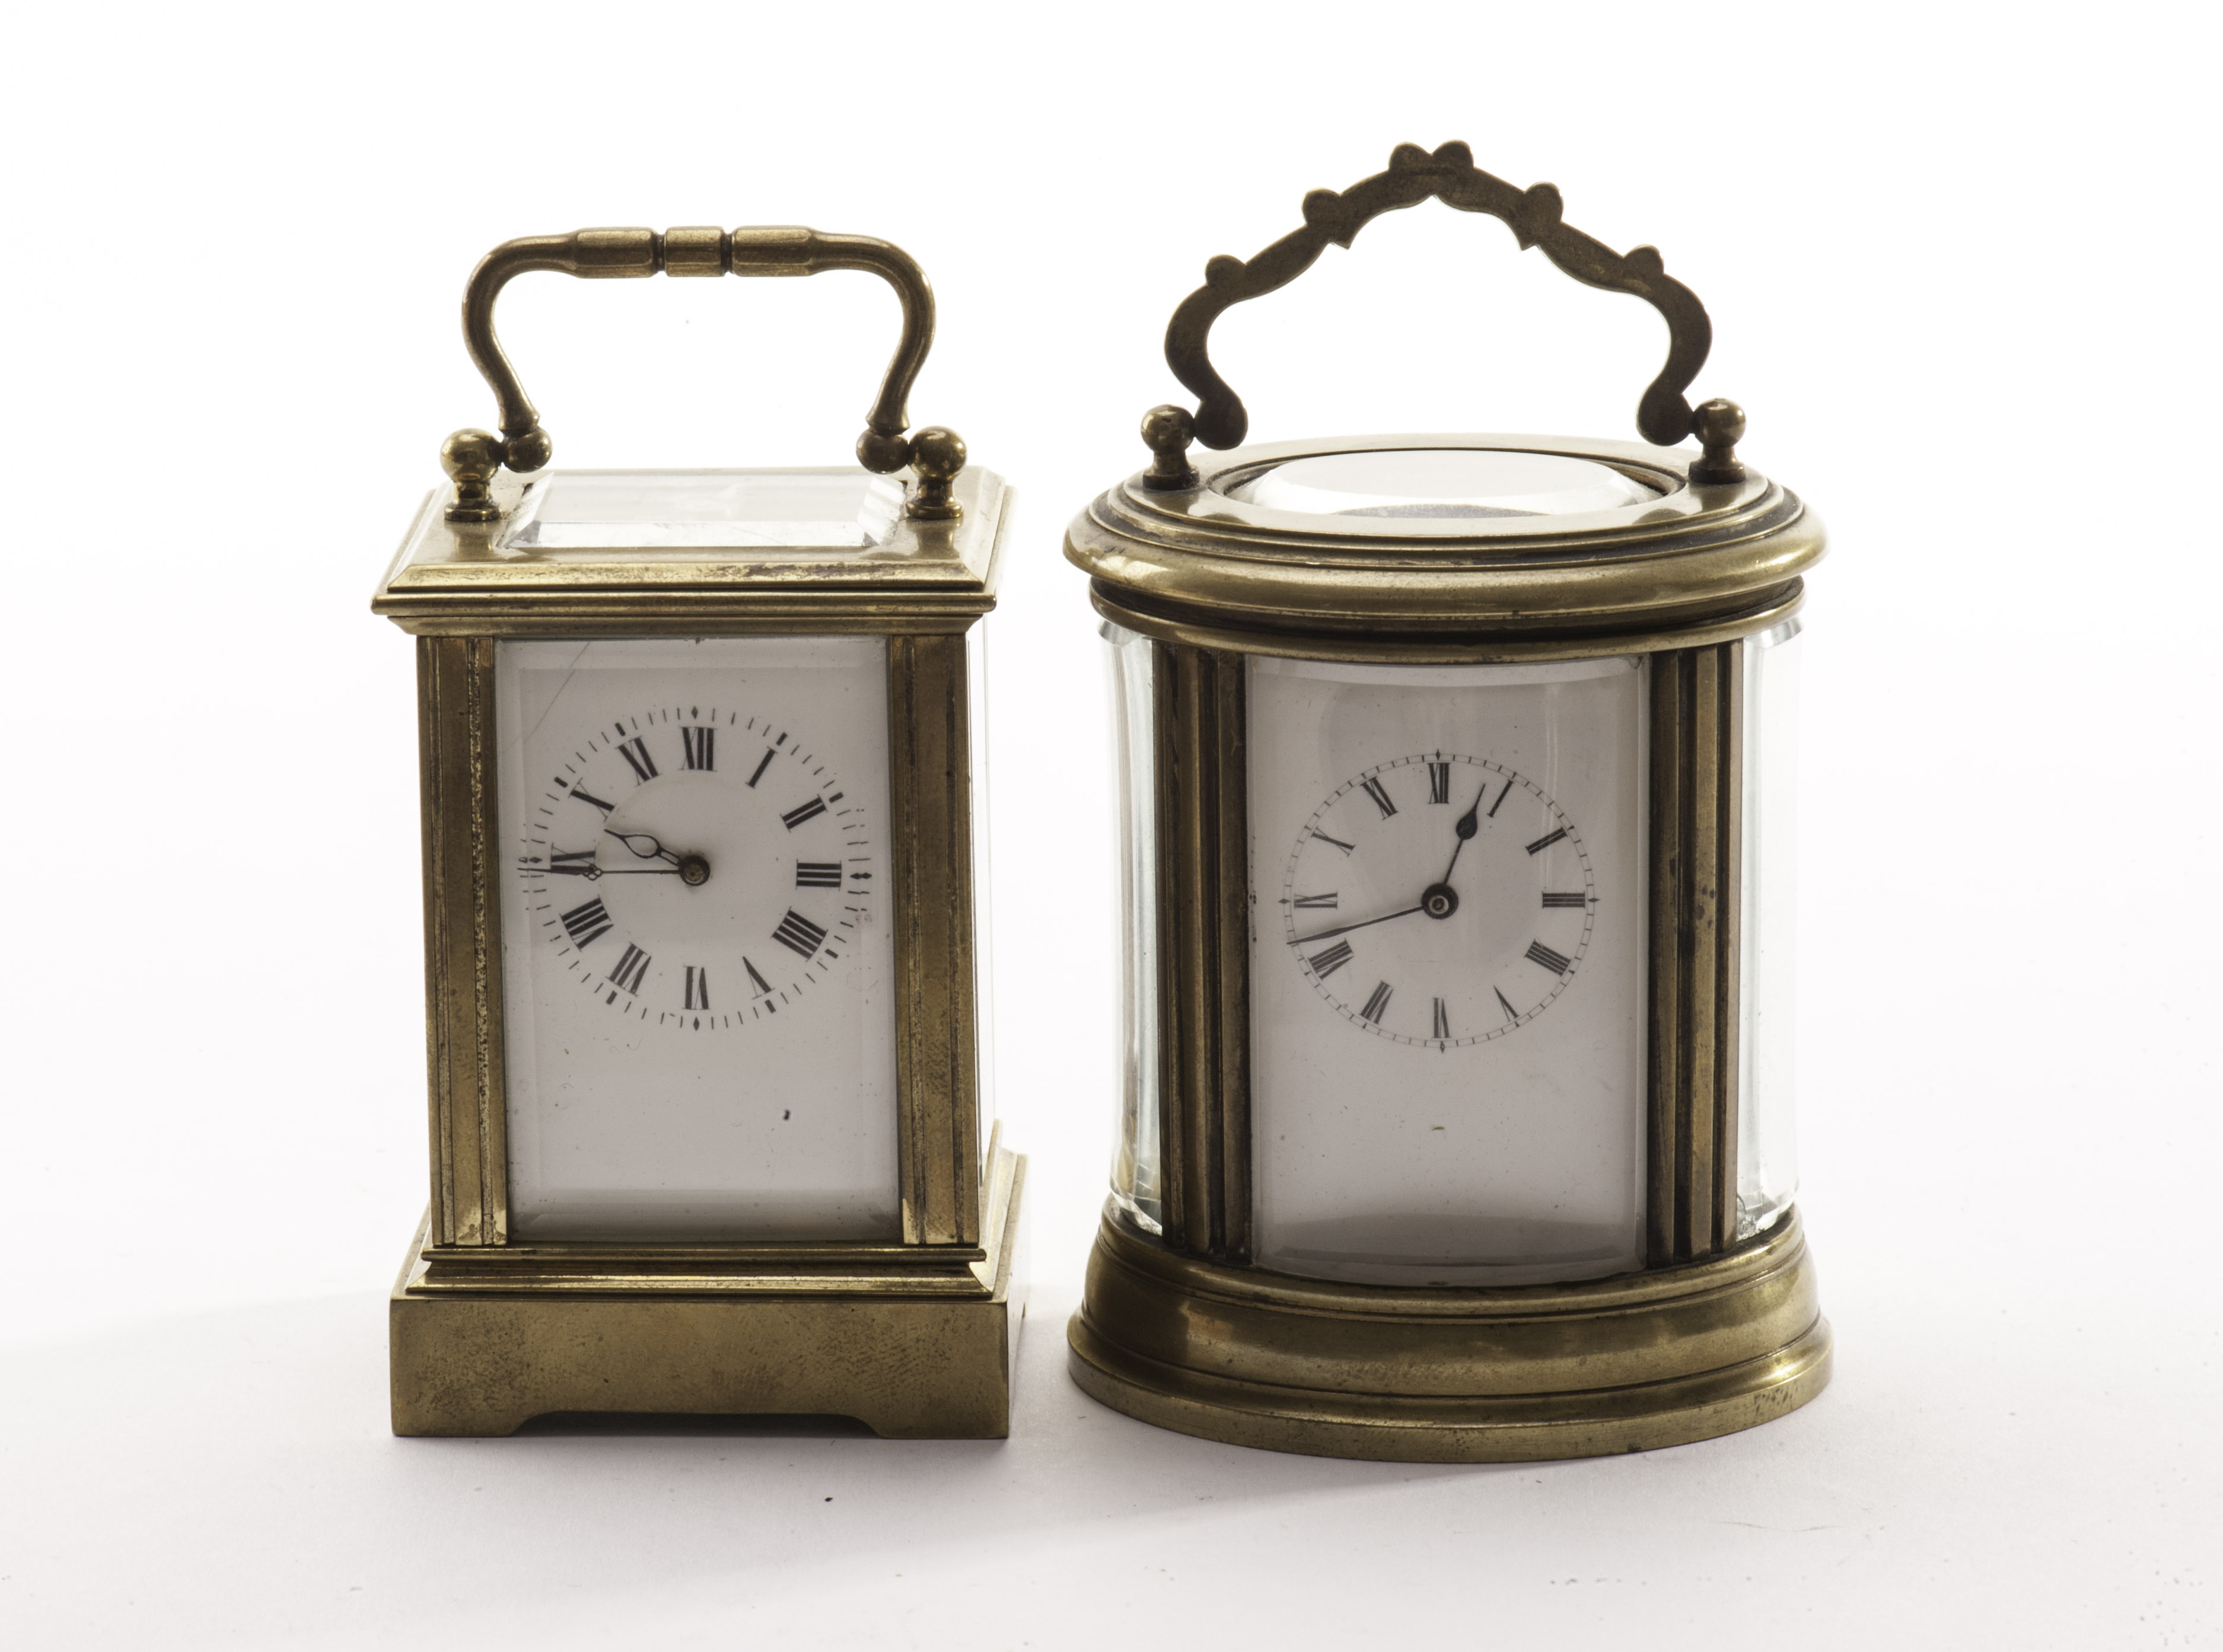 Two minitaure brass carriage timepieces, one traditional form with arch lever escapement, the other